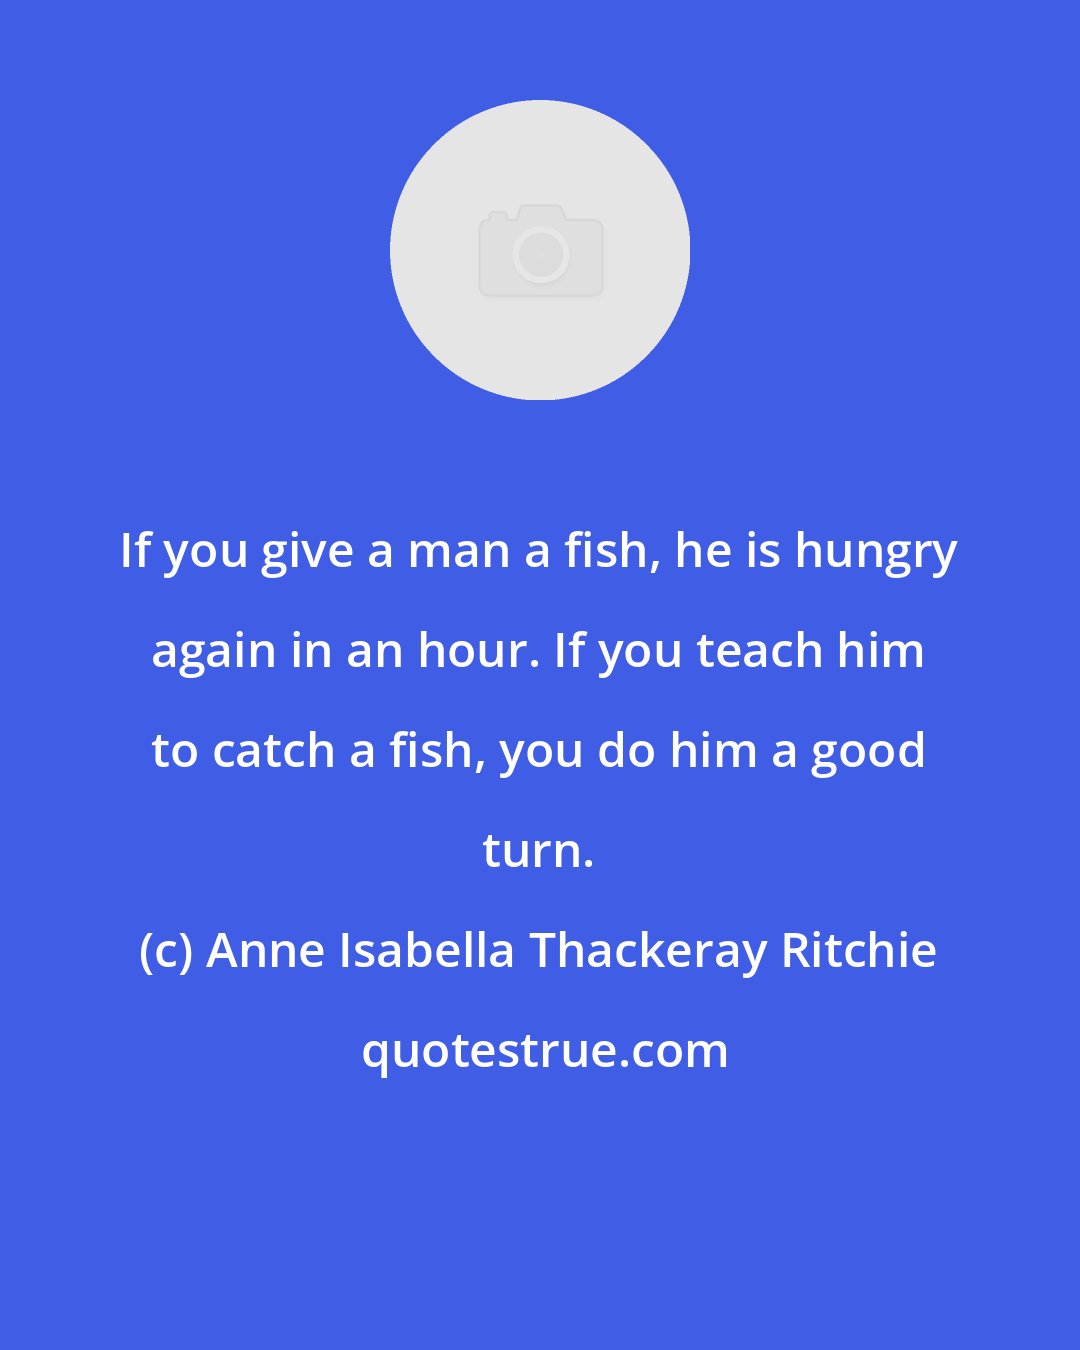 Anne Isabella Thackeray Ritchie: If you give a man a fish, he is hungry again in an hour. If you teach him to catch a fish, you do him a good turn.